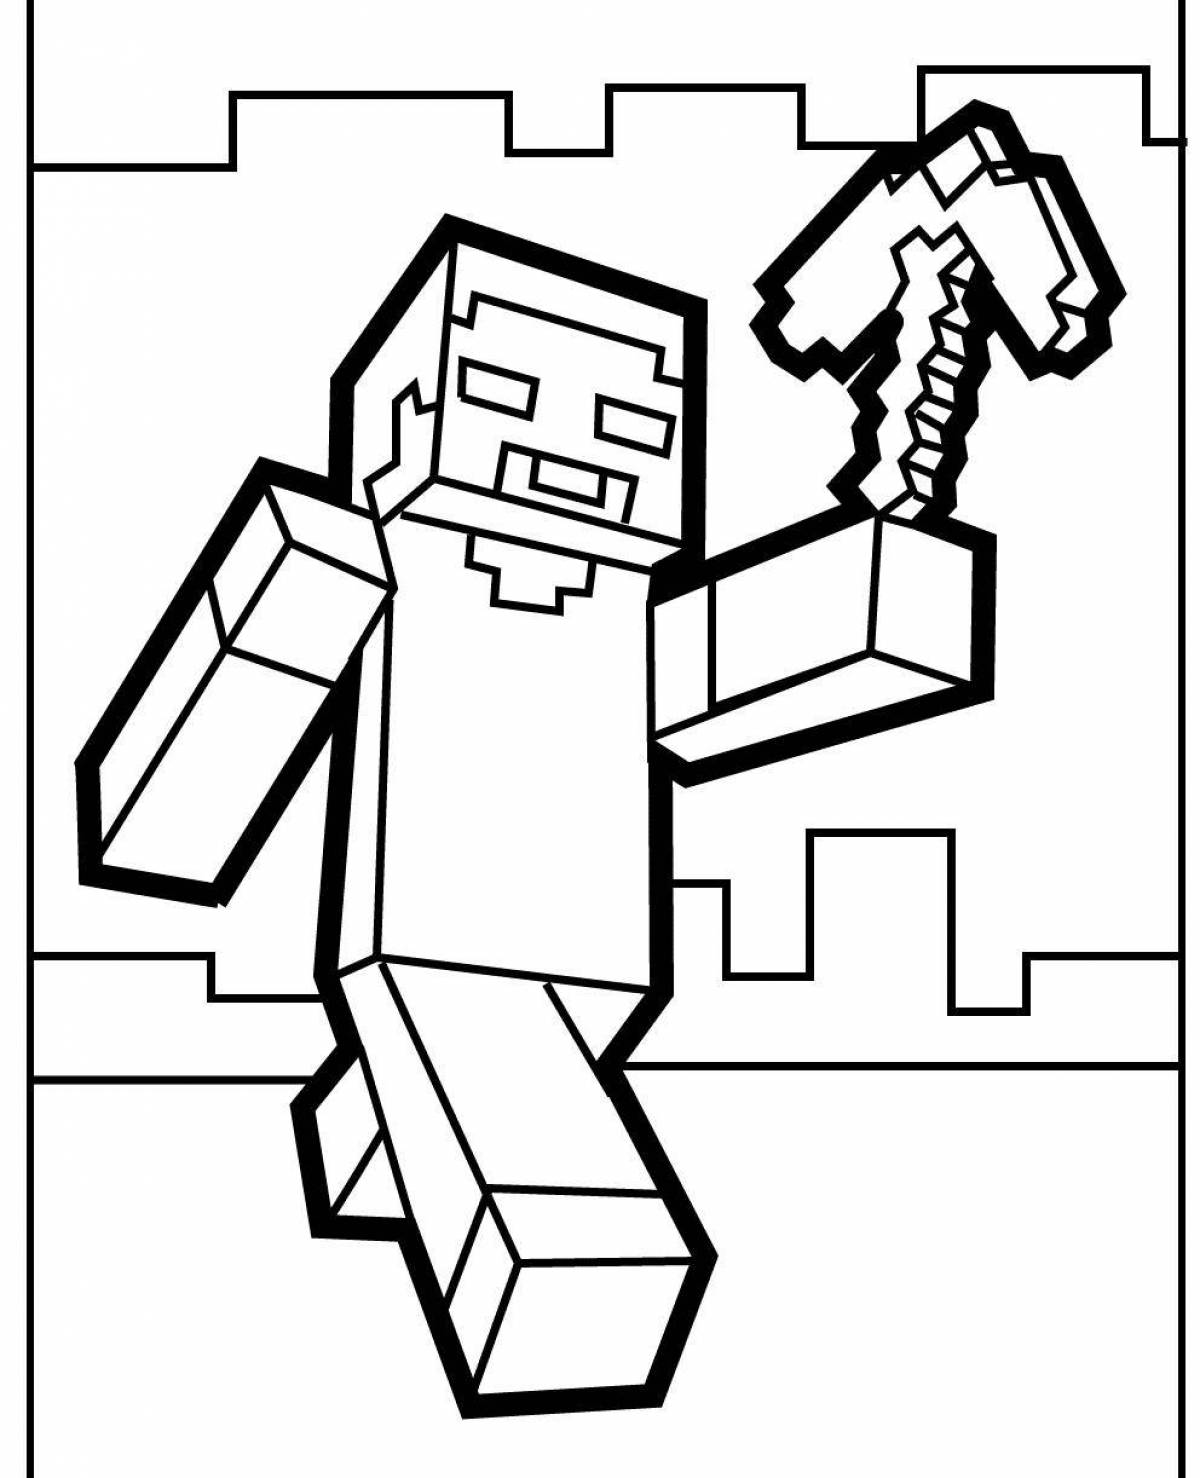 Colorful minecraft heart coloring page